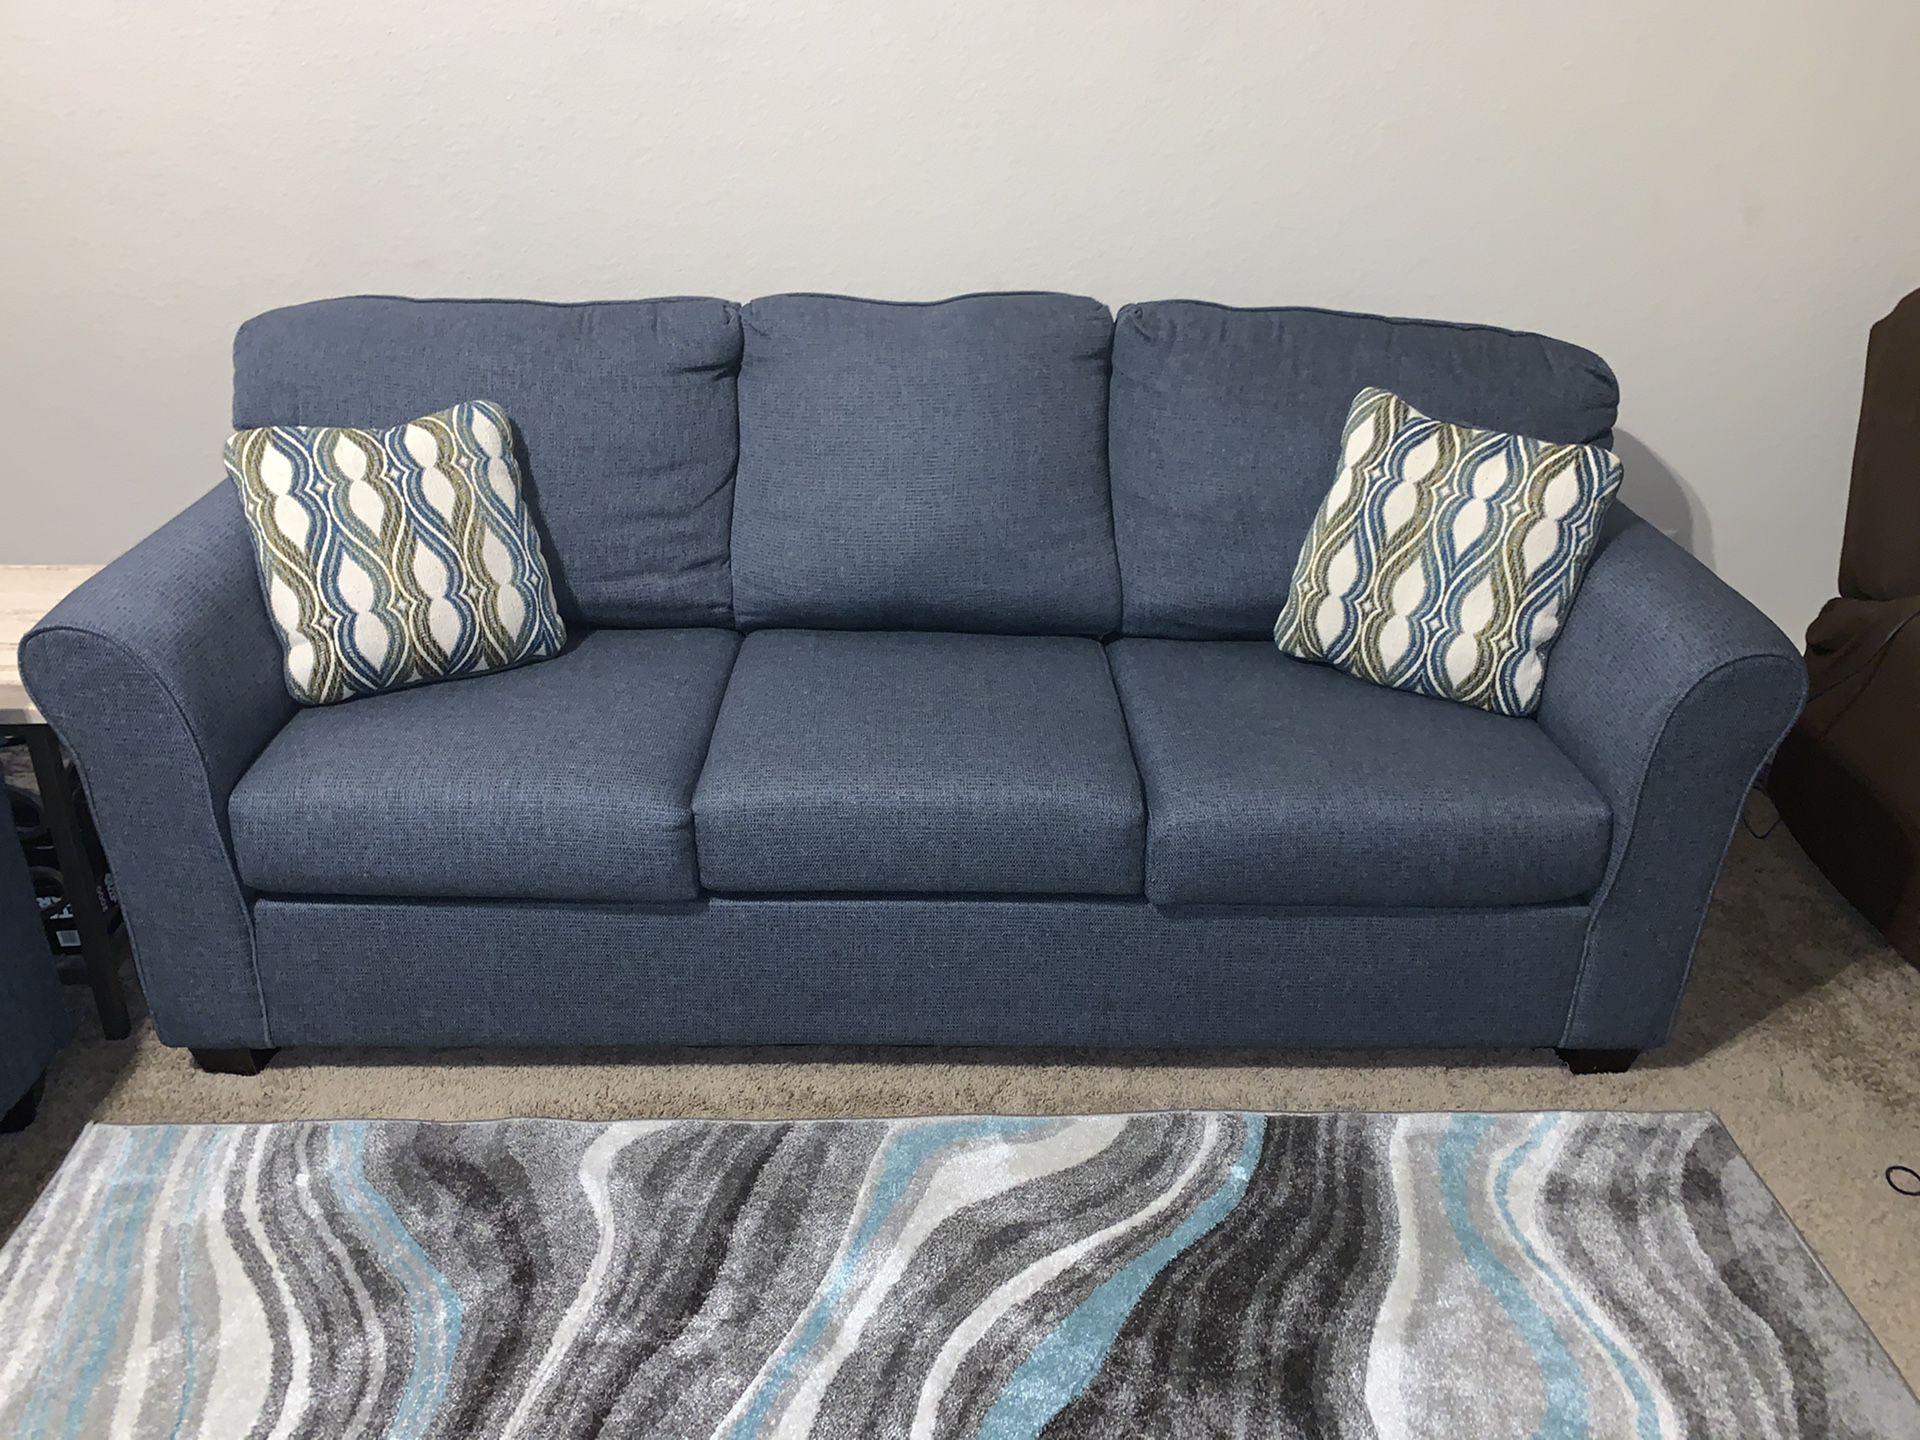 Couch and Love seat